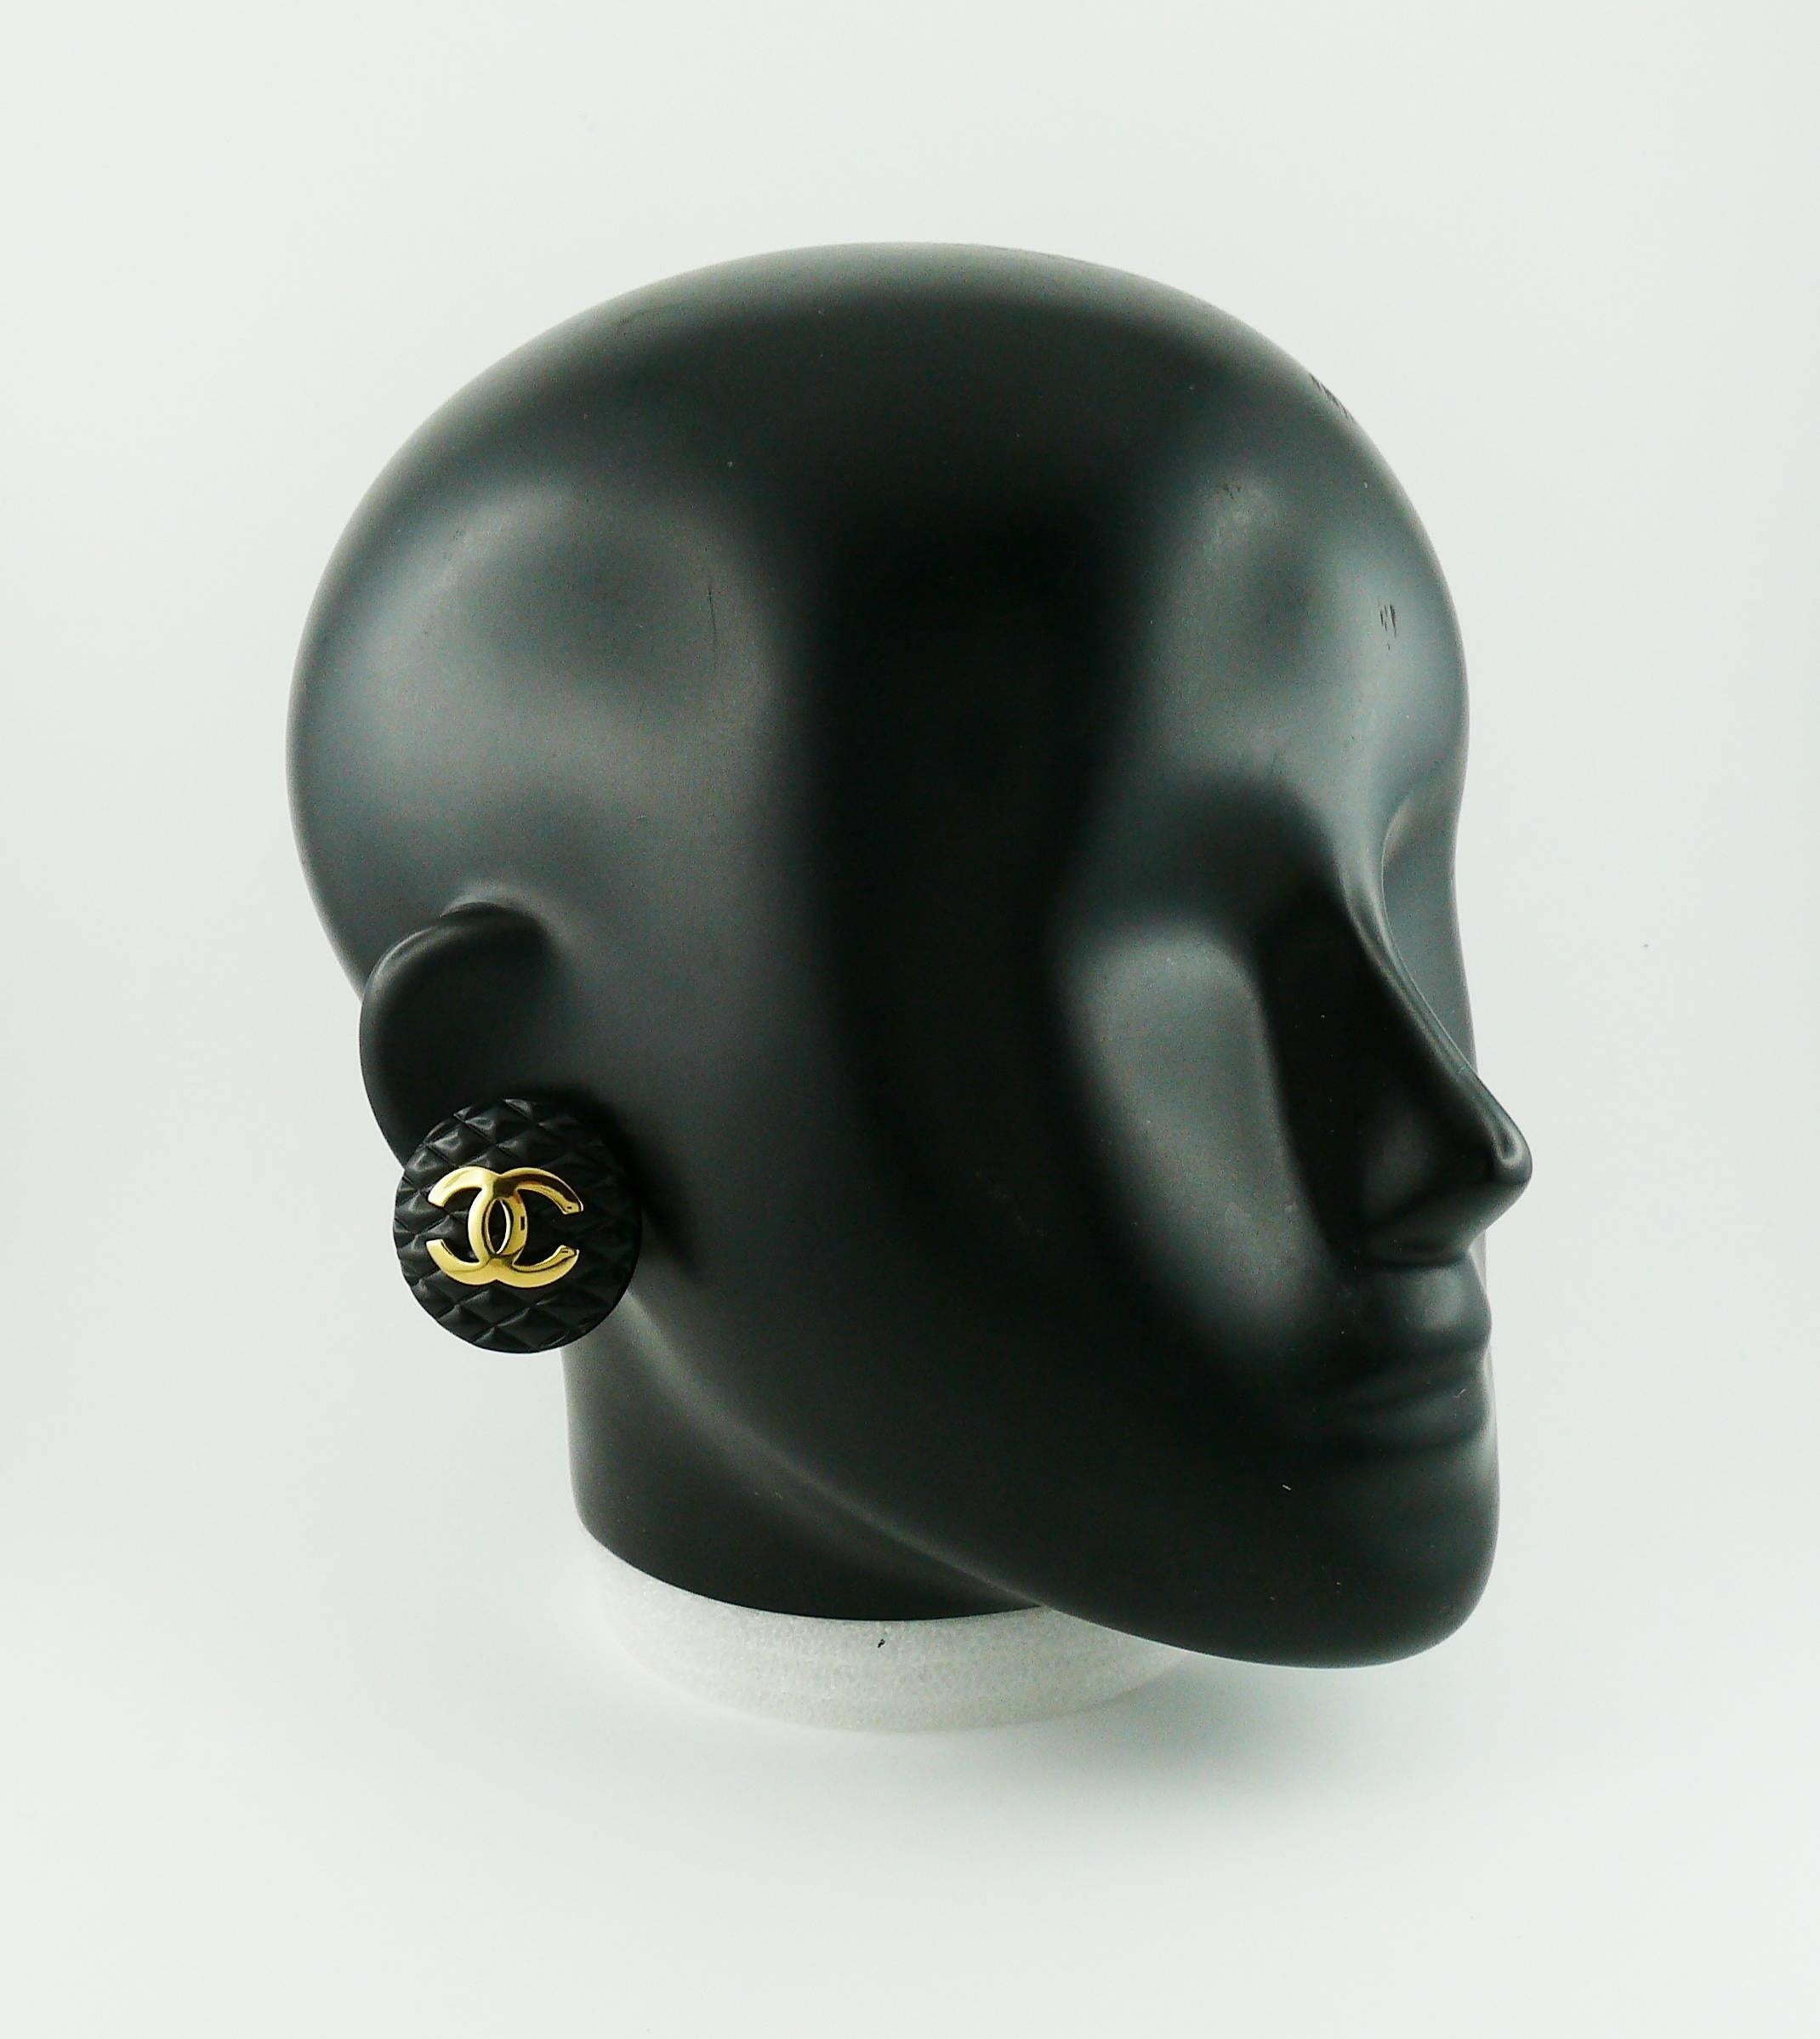 CHANEL vintage large quilted black resin clip-on earrings featuring a gold toned CC monogram.

Embossed CHANEL.

Indicative measurements : diameter approx. 3.4 cm (1.34 inches).

JEWELRY CONDITION CHART
- New or never worn : item is in pristine